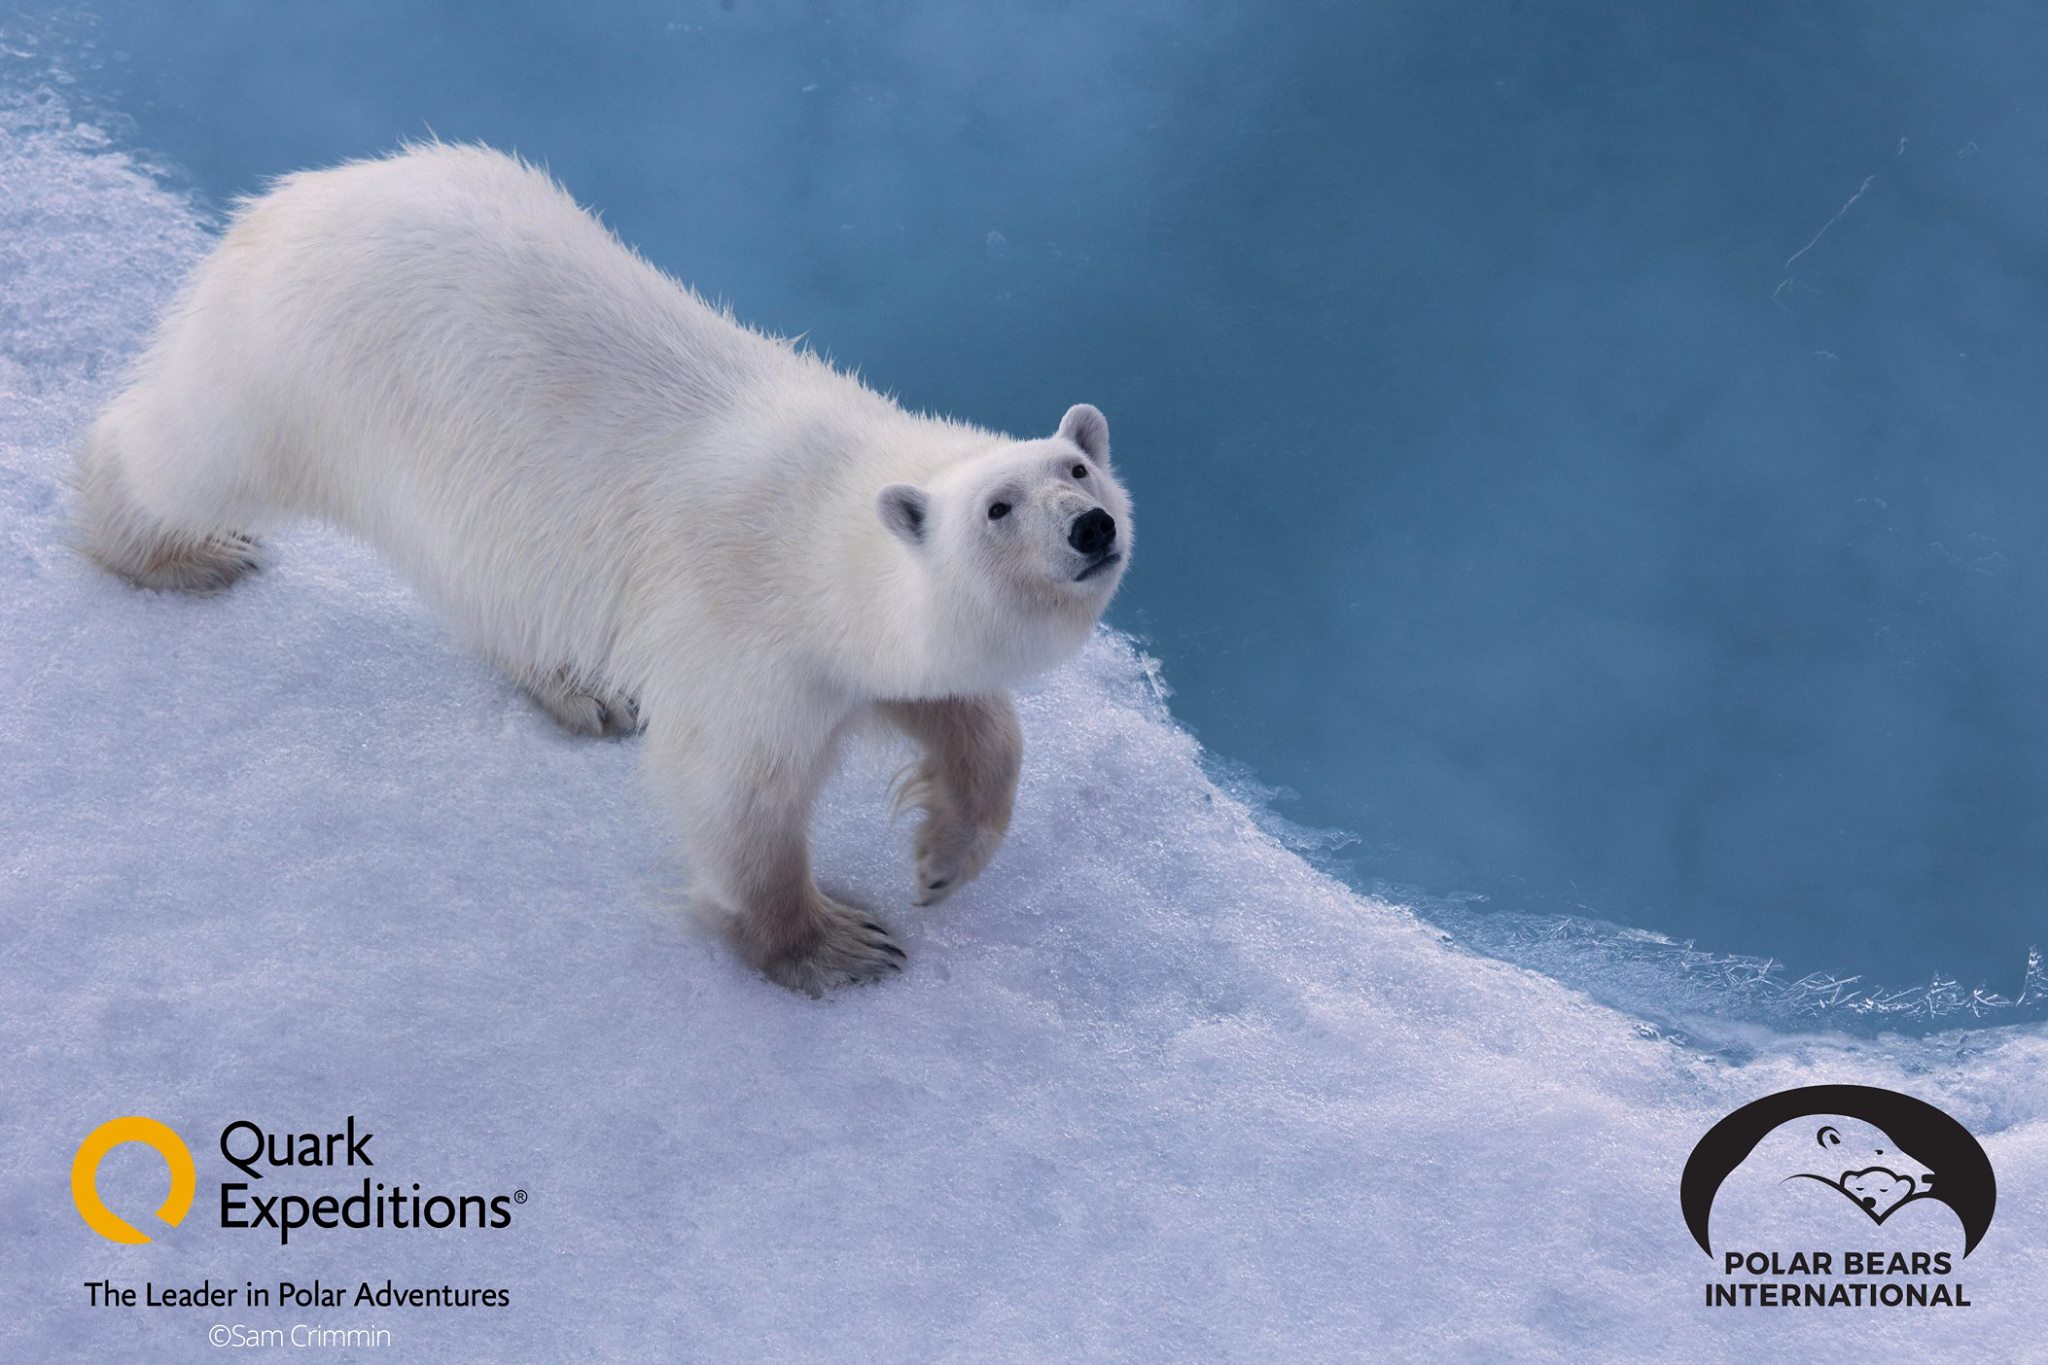 Join Polar Bears International experts en route to the North Pole with Quark Expeditions to learn more about polar bears in their natural habitat!